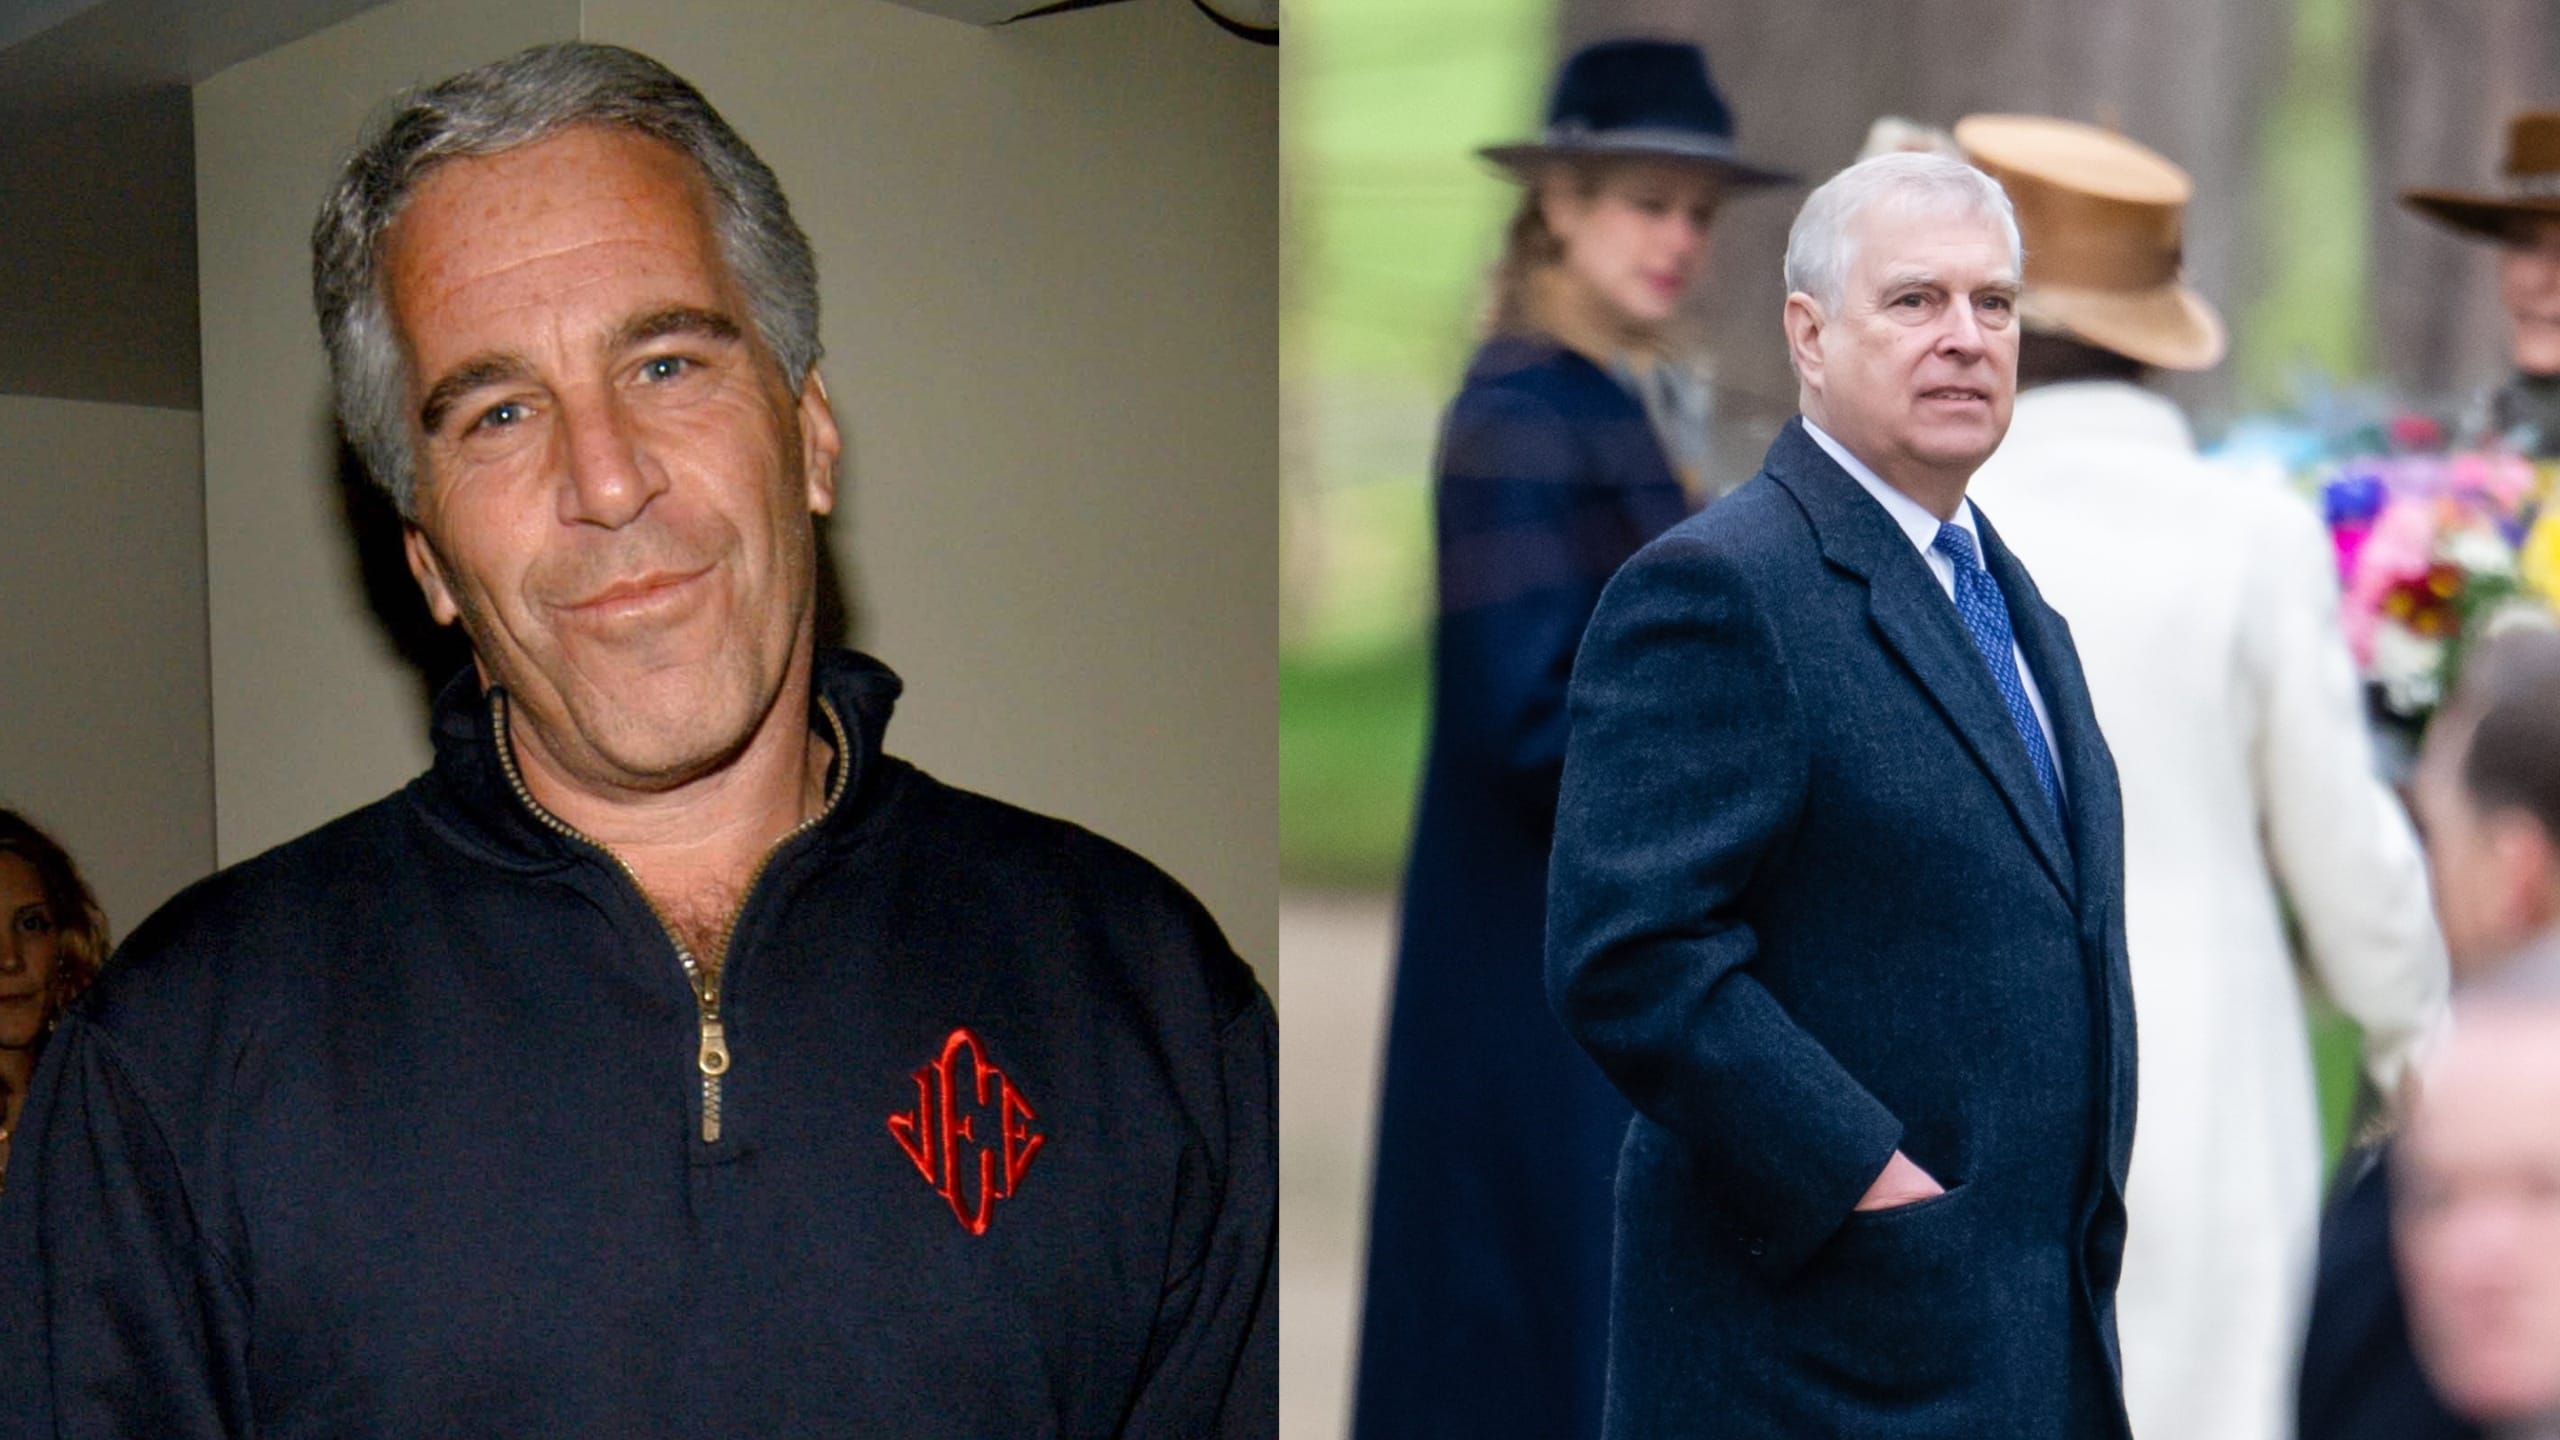 Prince Andrew accused of raping Virginia Guiffre.